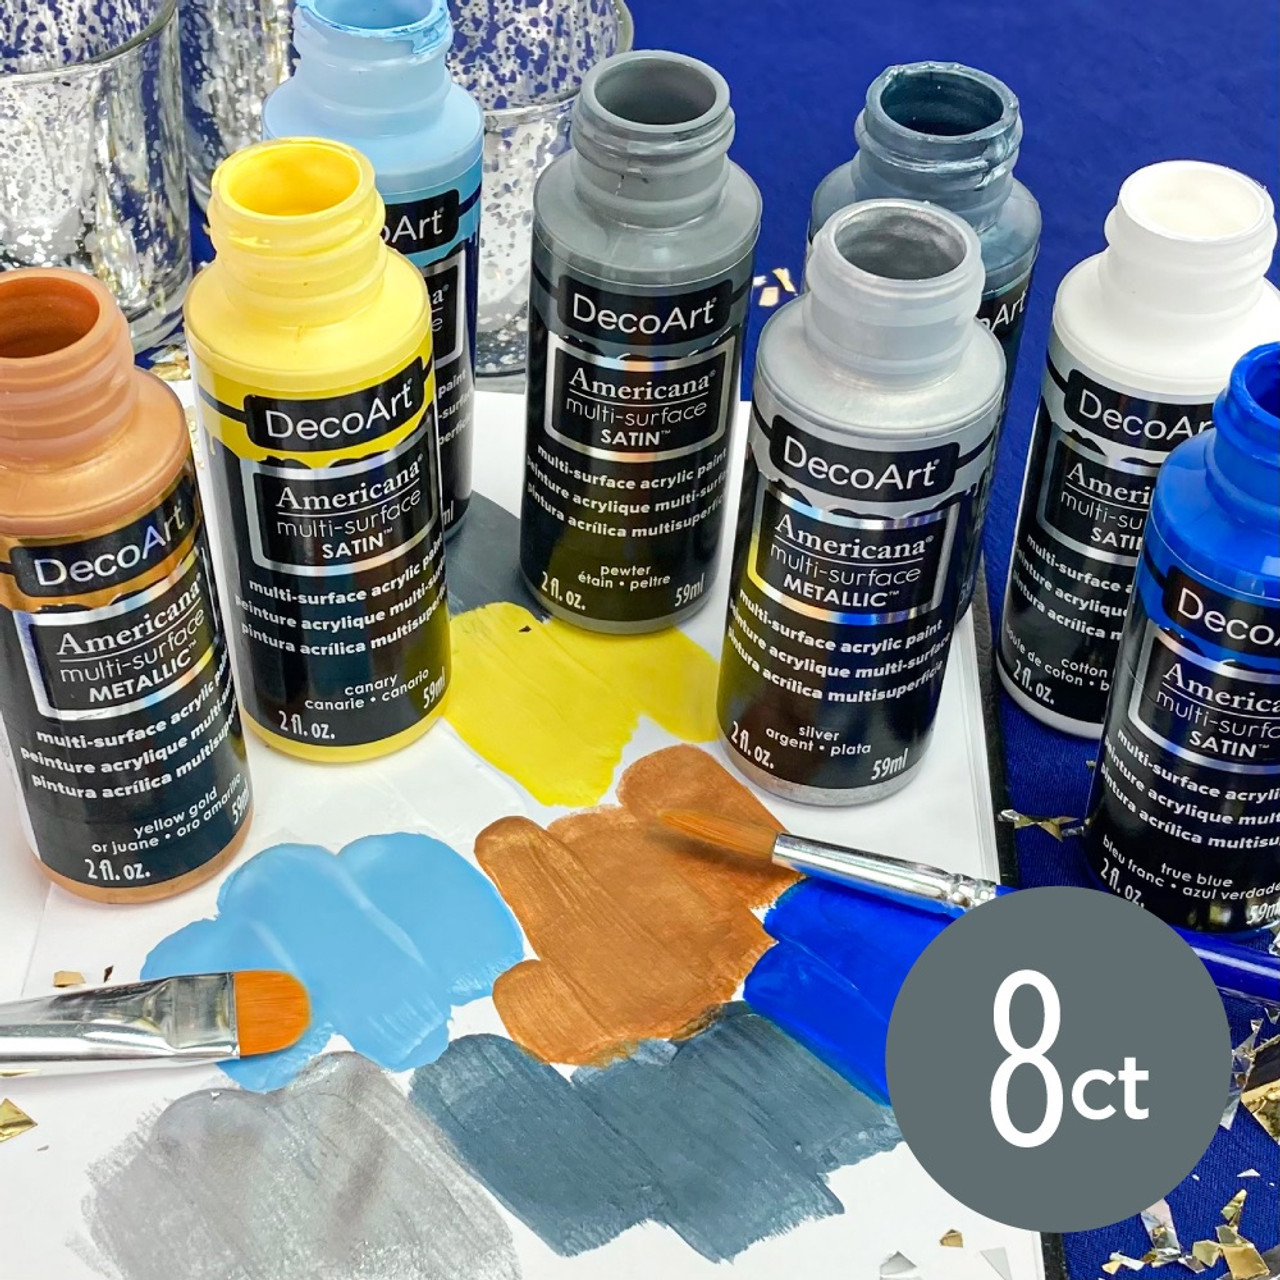 Decoart Crafters Acrylic Paints Gold Shades 59ml 2oz Bottles